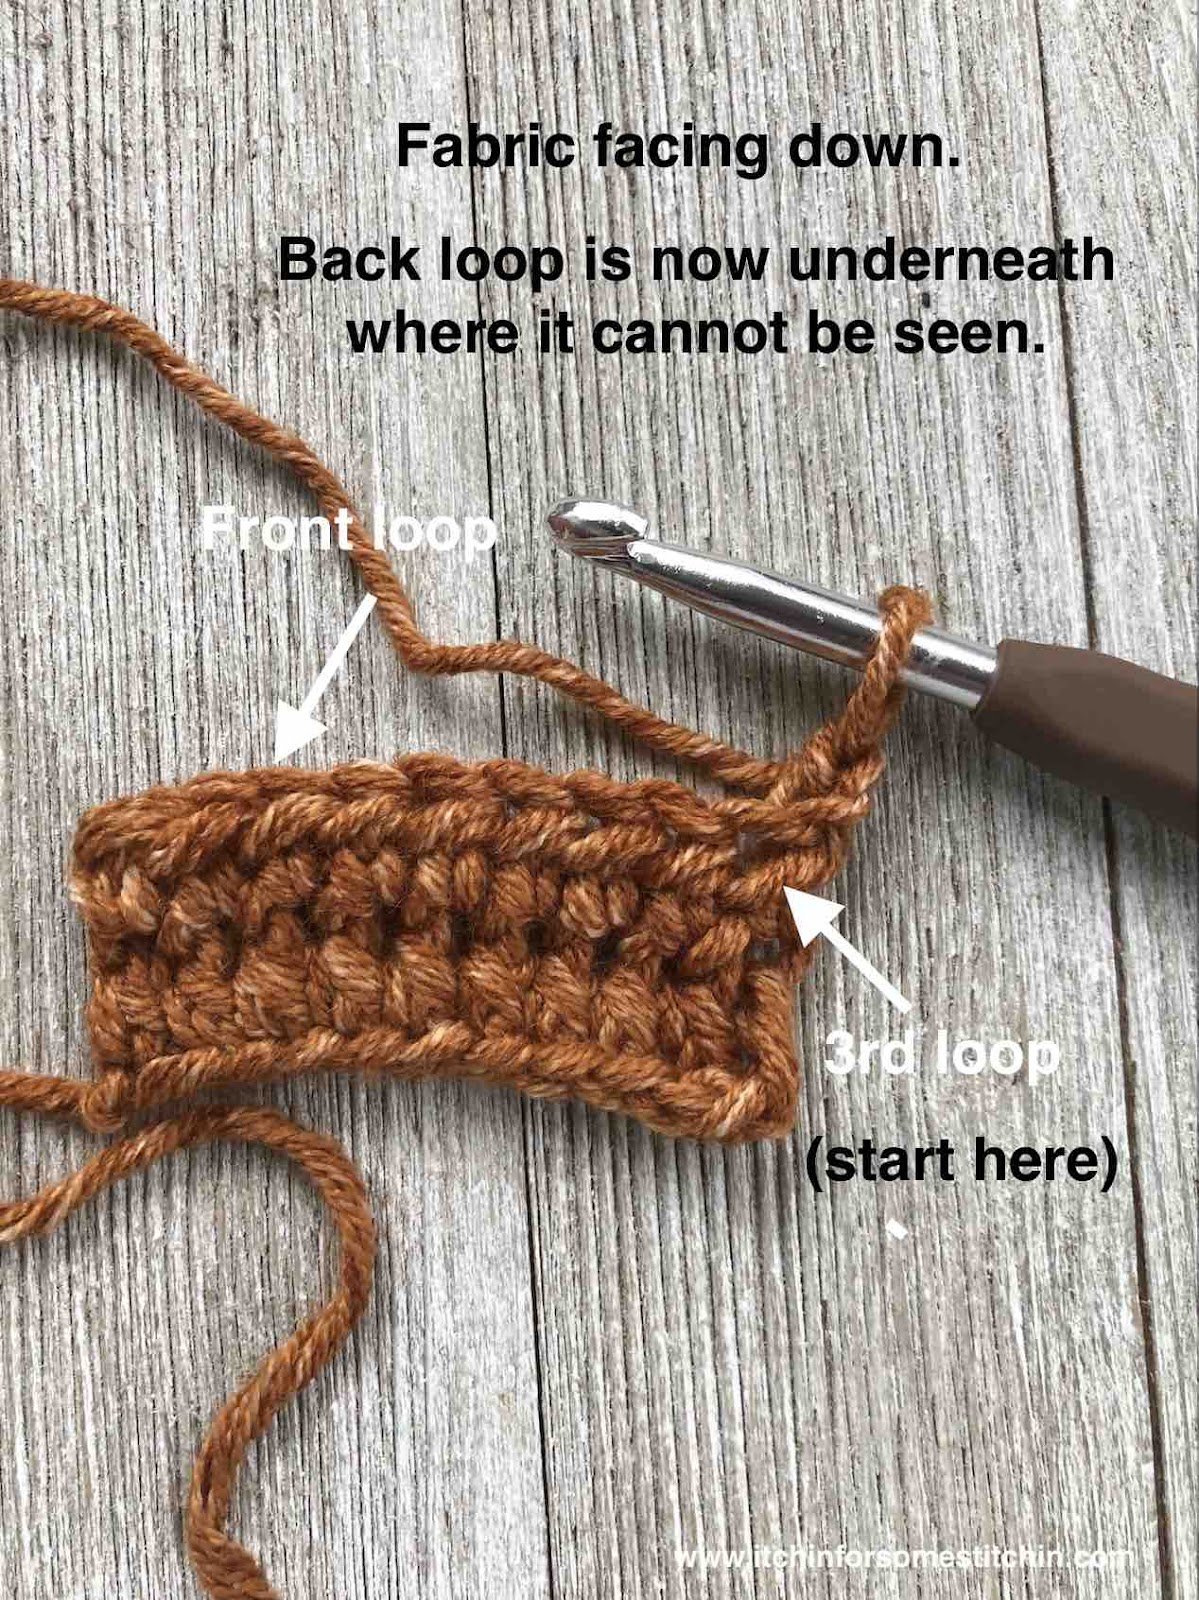 How to crochet in the 3rd loop by www.itchinforsomestitchin.com